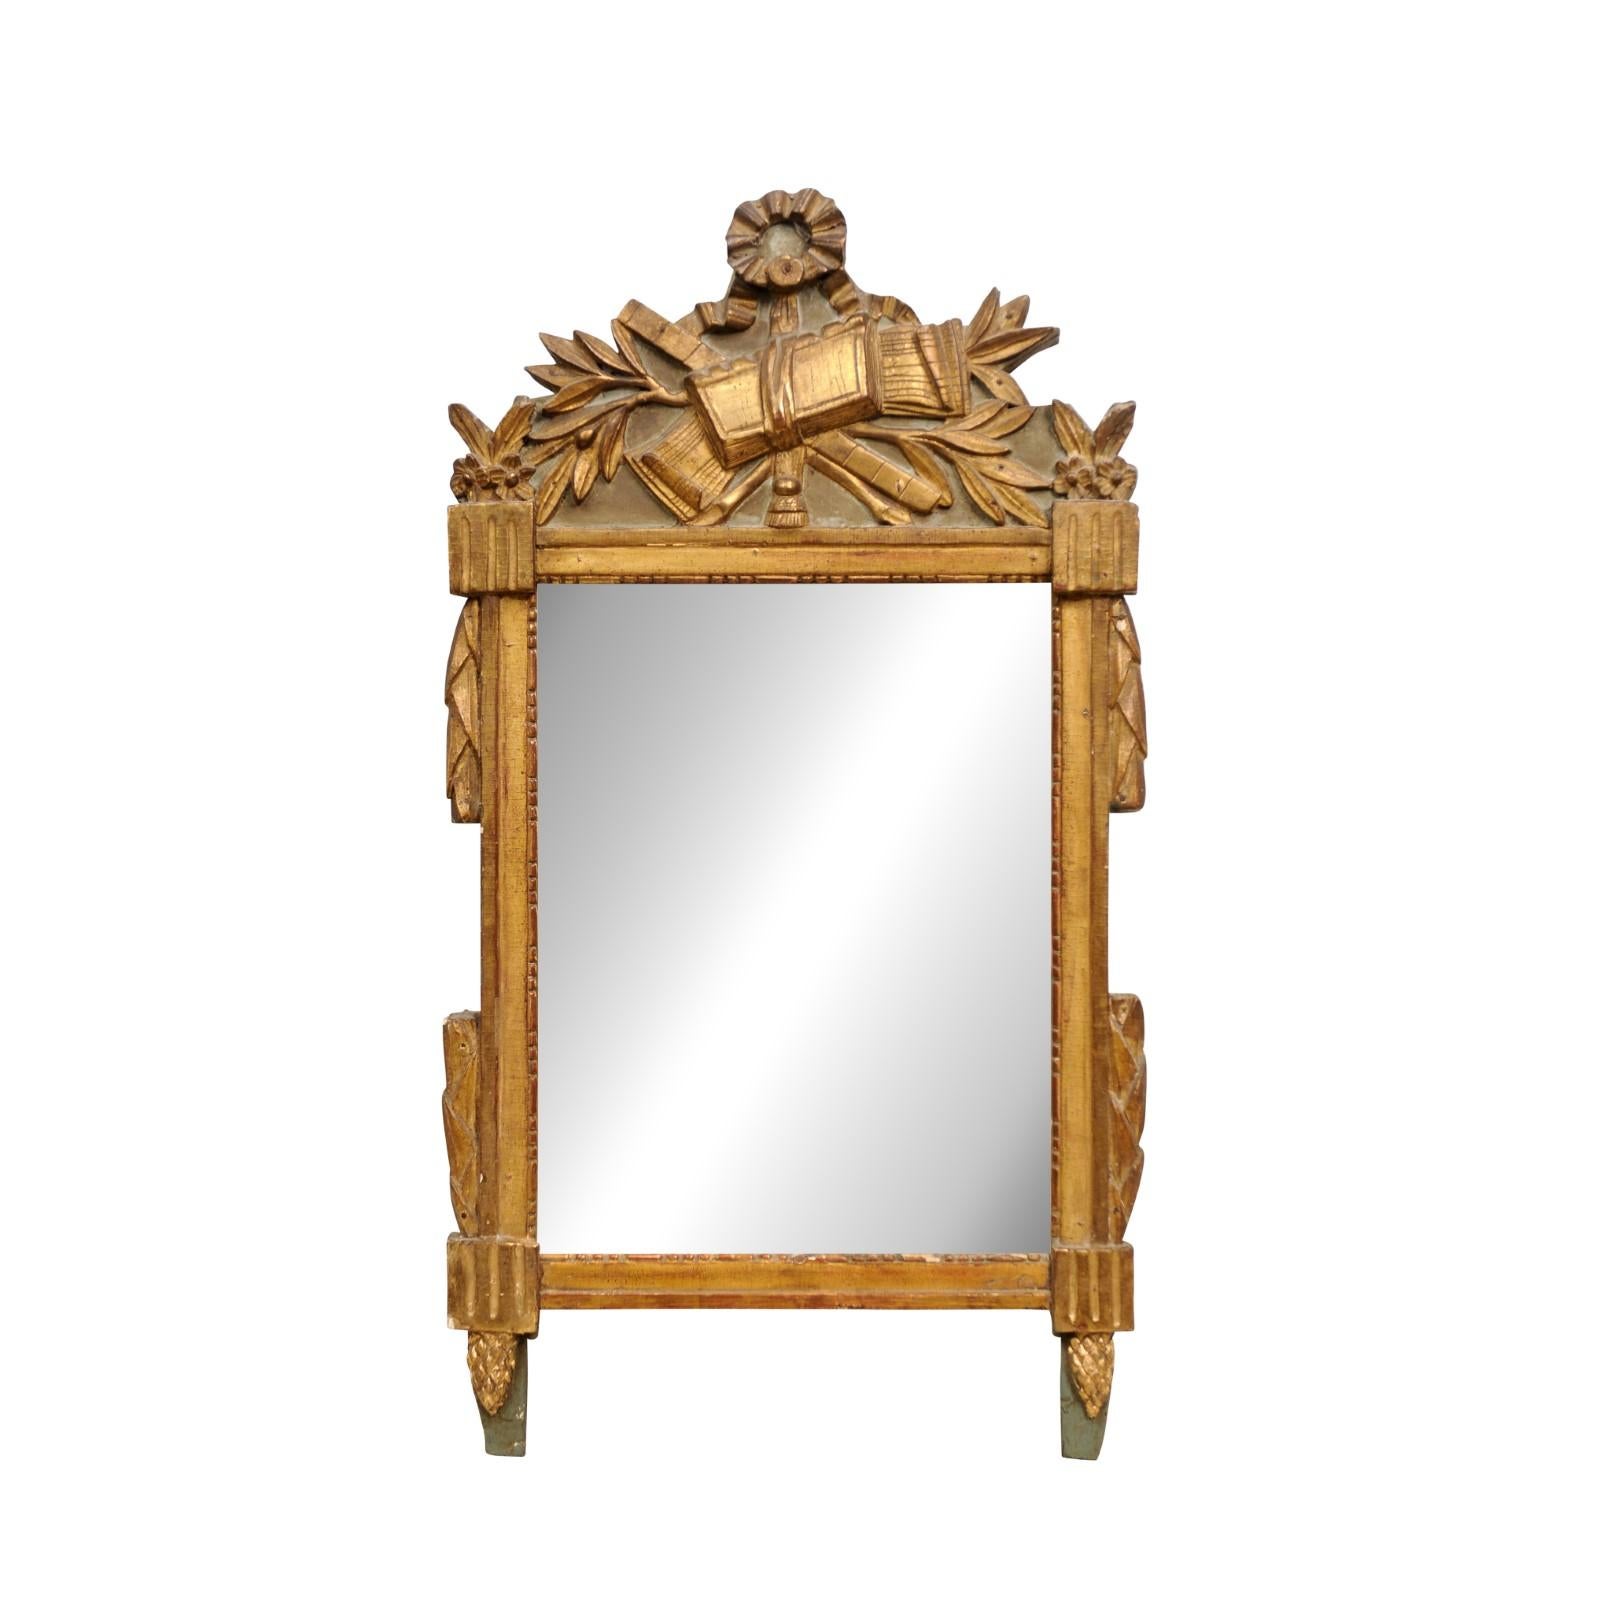 French Louis XVI period giltwood mirror circa 1790 with carved ribbon-tied liberal arts allegory, laurel leaves and pine cone motifs, painted background, slightly aged mirror and rustic character. Introducing a magnificent French Louis XVI period